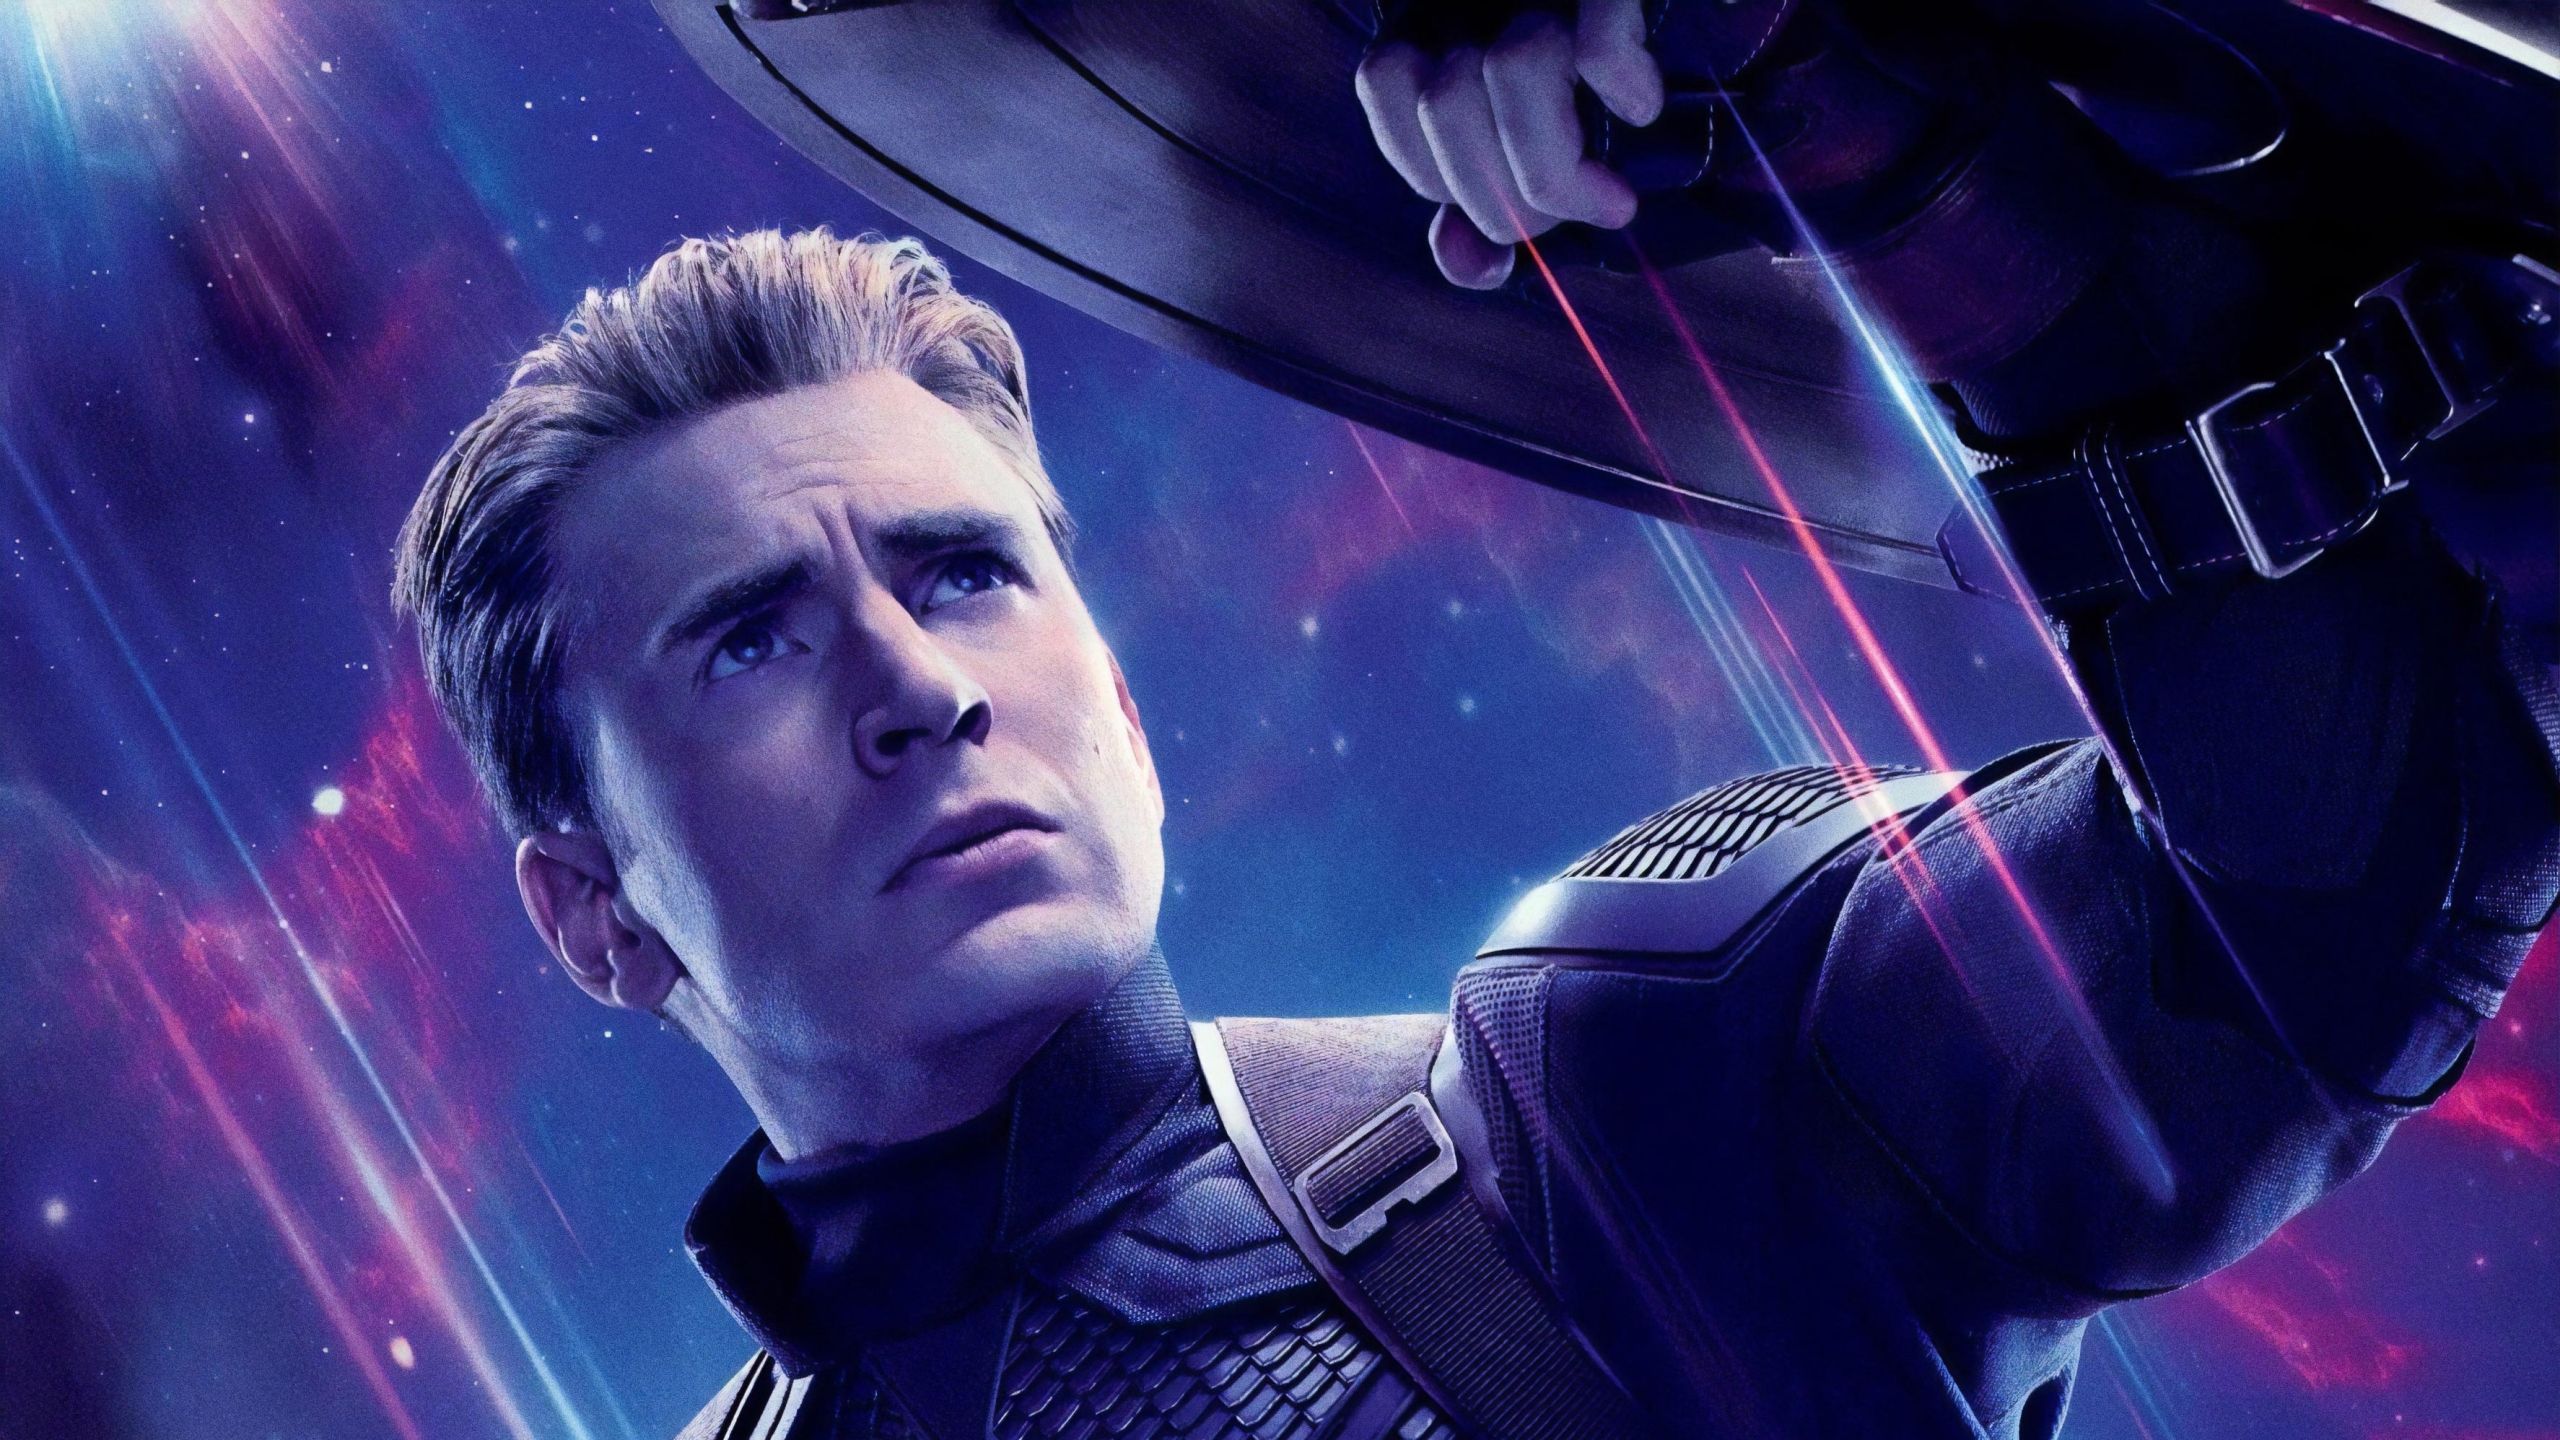 Captain America in Avengers Endgame 1440P Resolution Wallpaper, HD Movies 4K Wallpaper, Image, Photo and Background